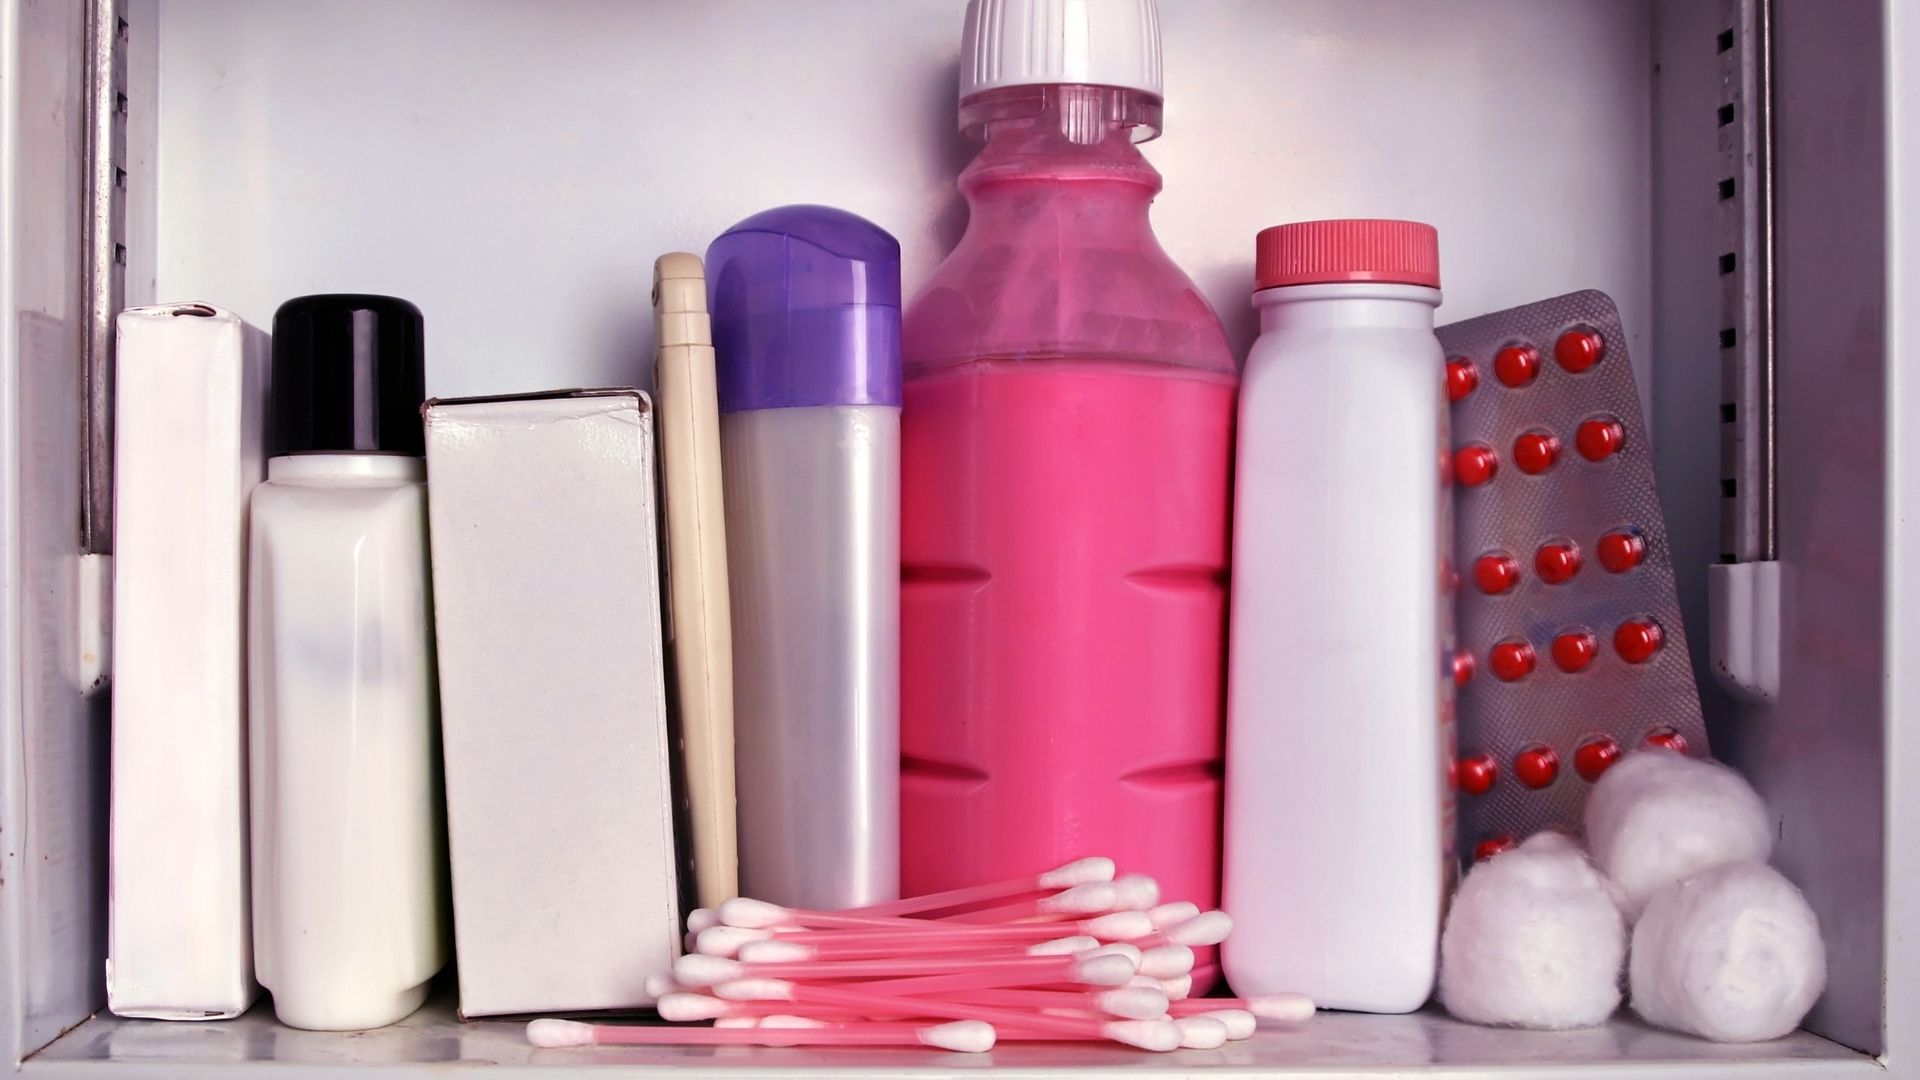 6 Things to Check in Your Medicine Cabinet